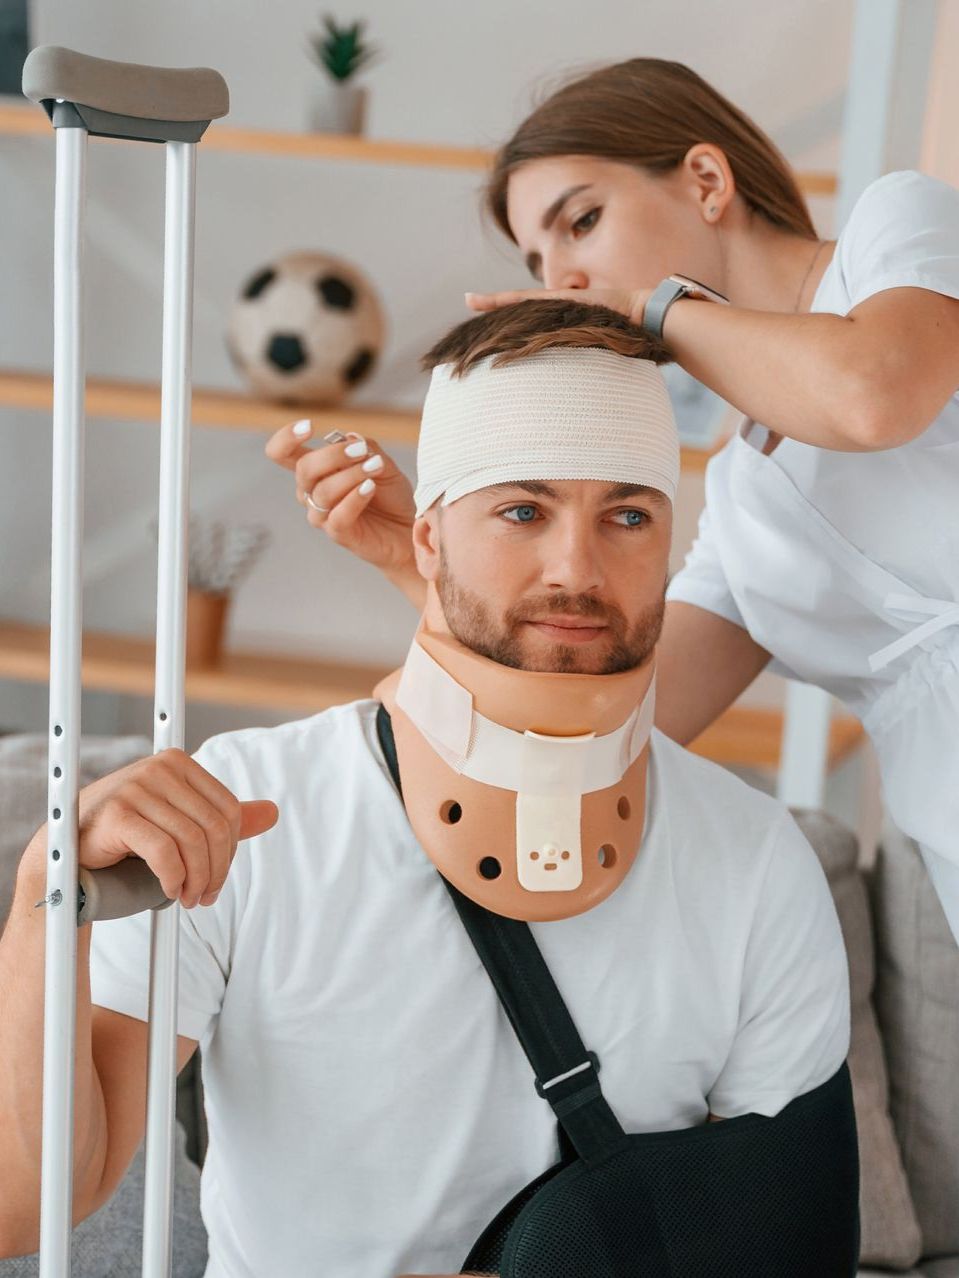 Nurse Applying Medical Band on the Patient Head